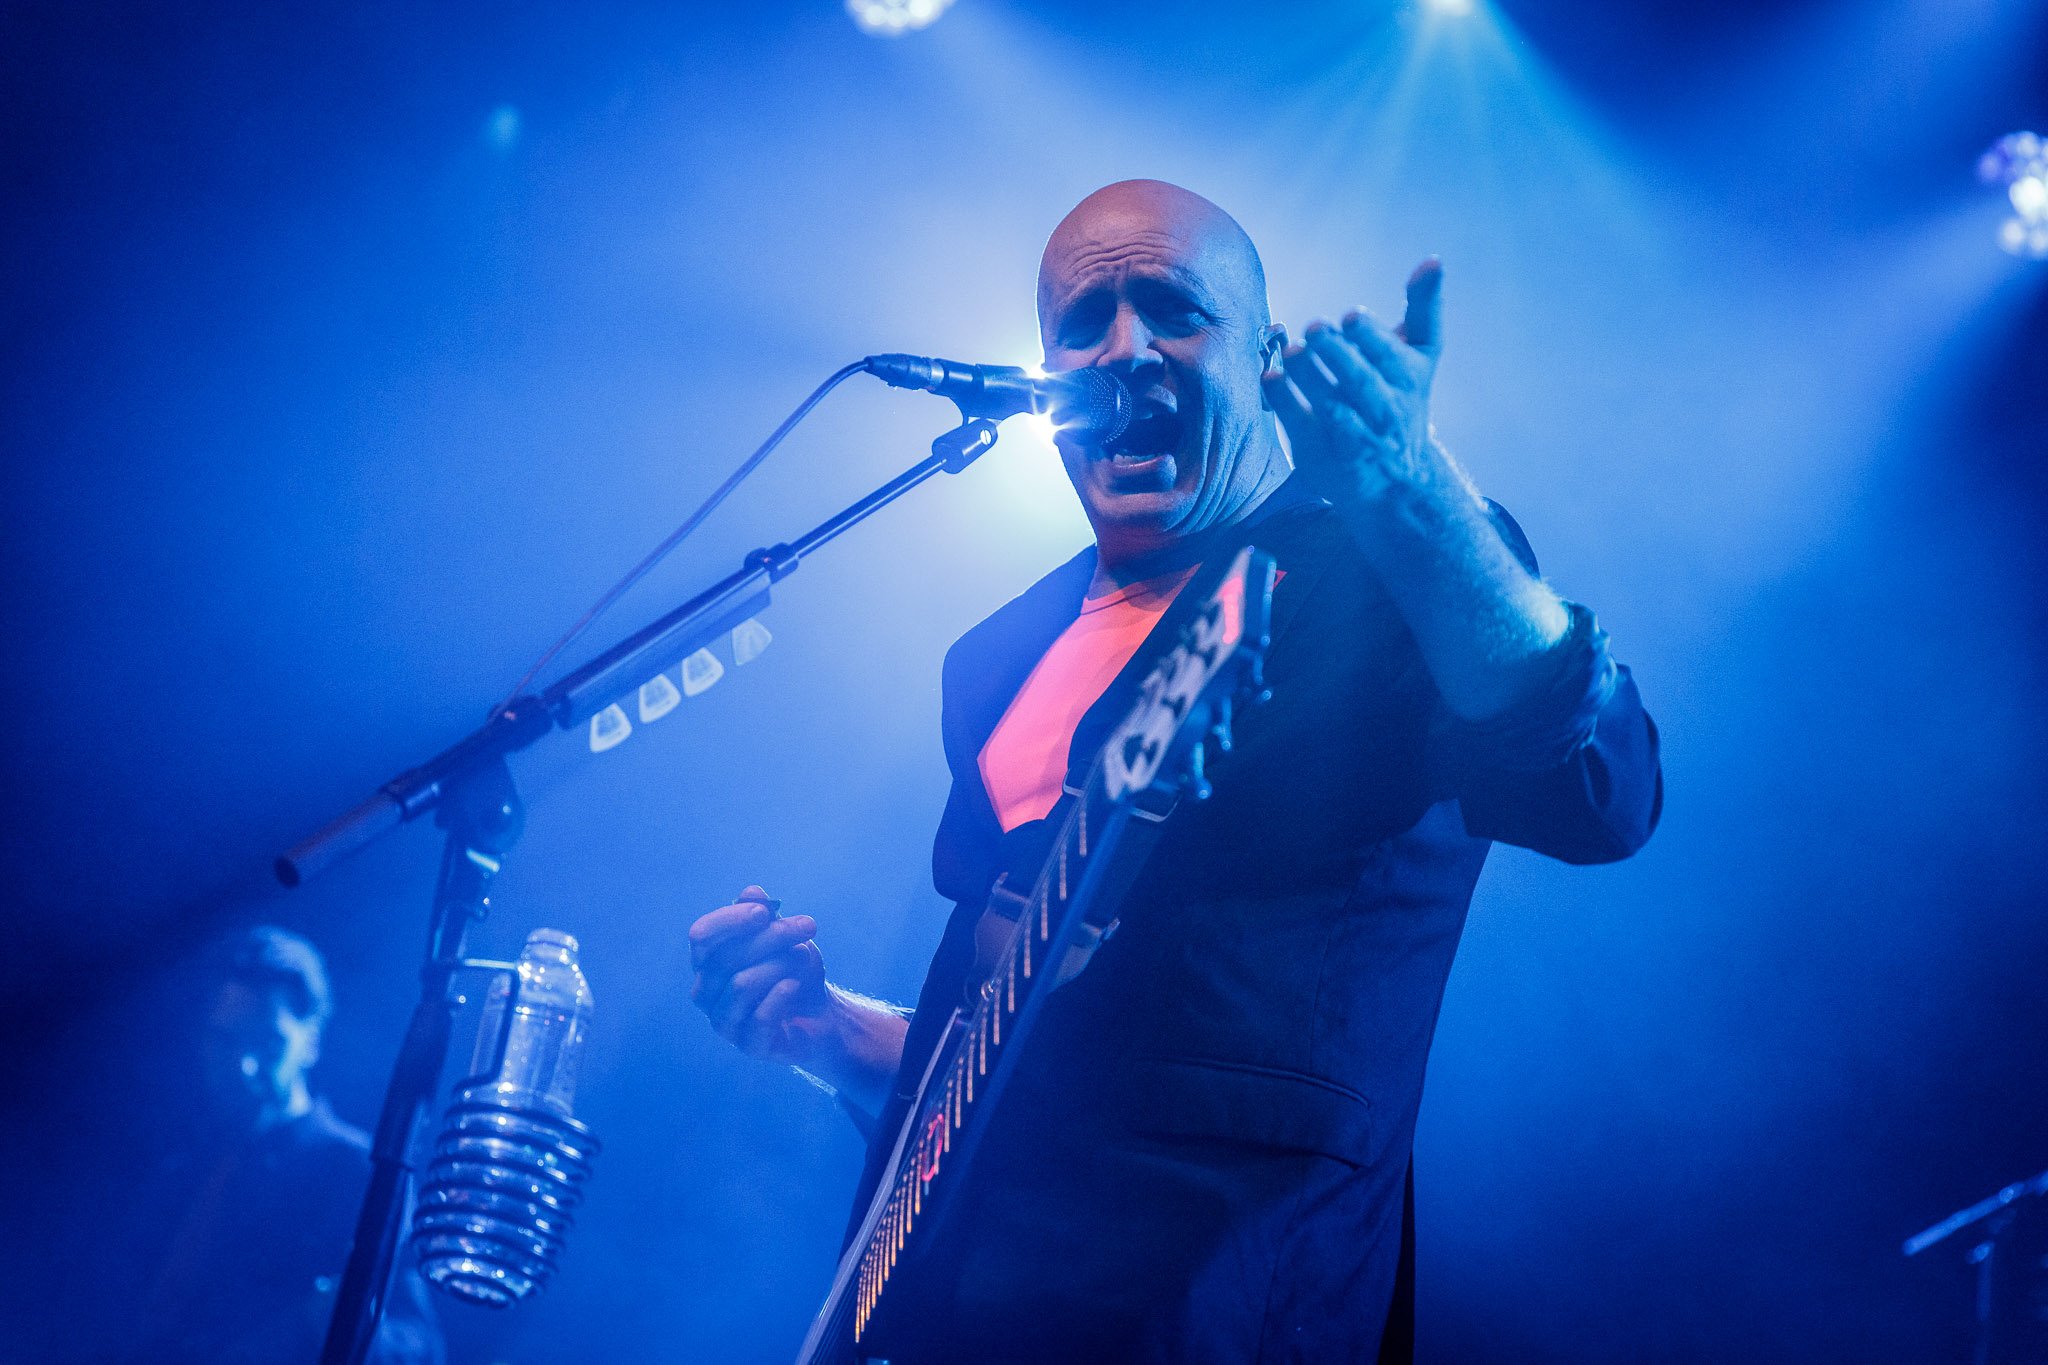 Devin Townsend at the Academy in Manchester on March 31st 2023 